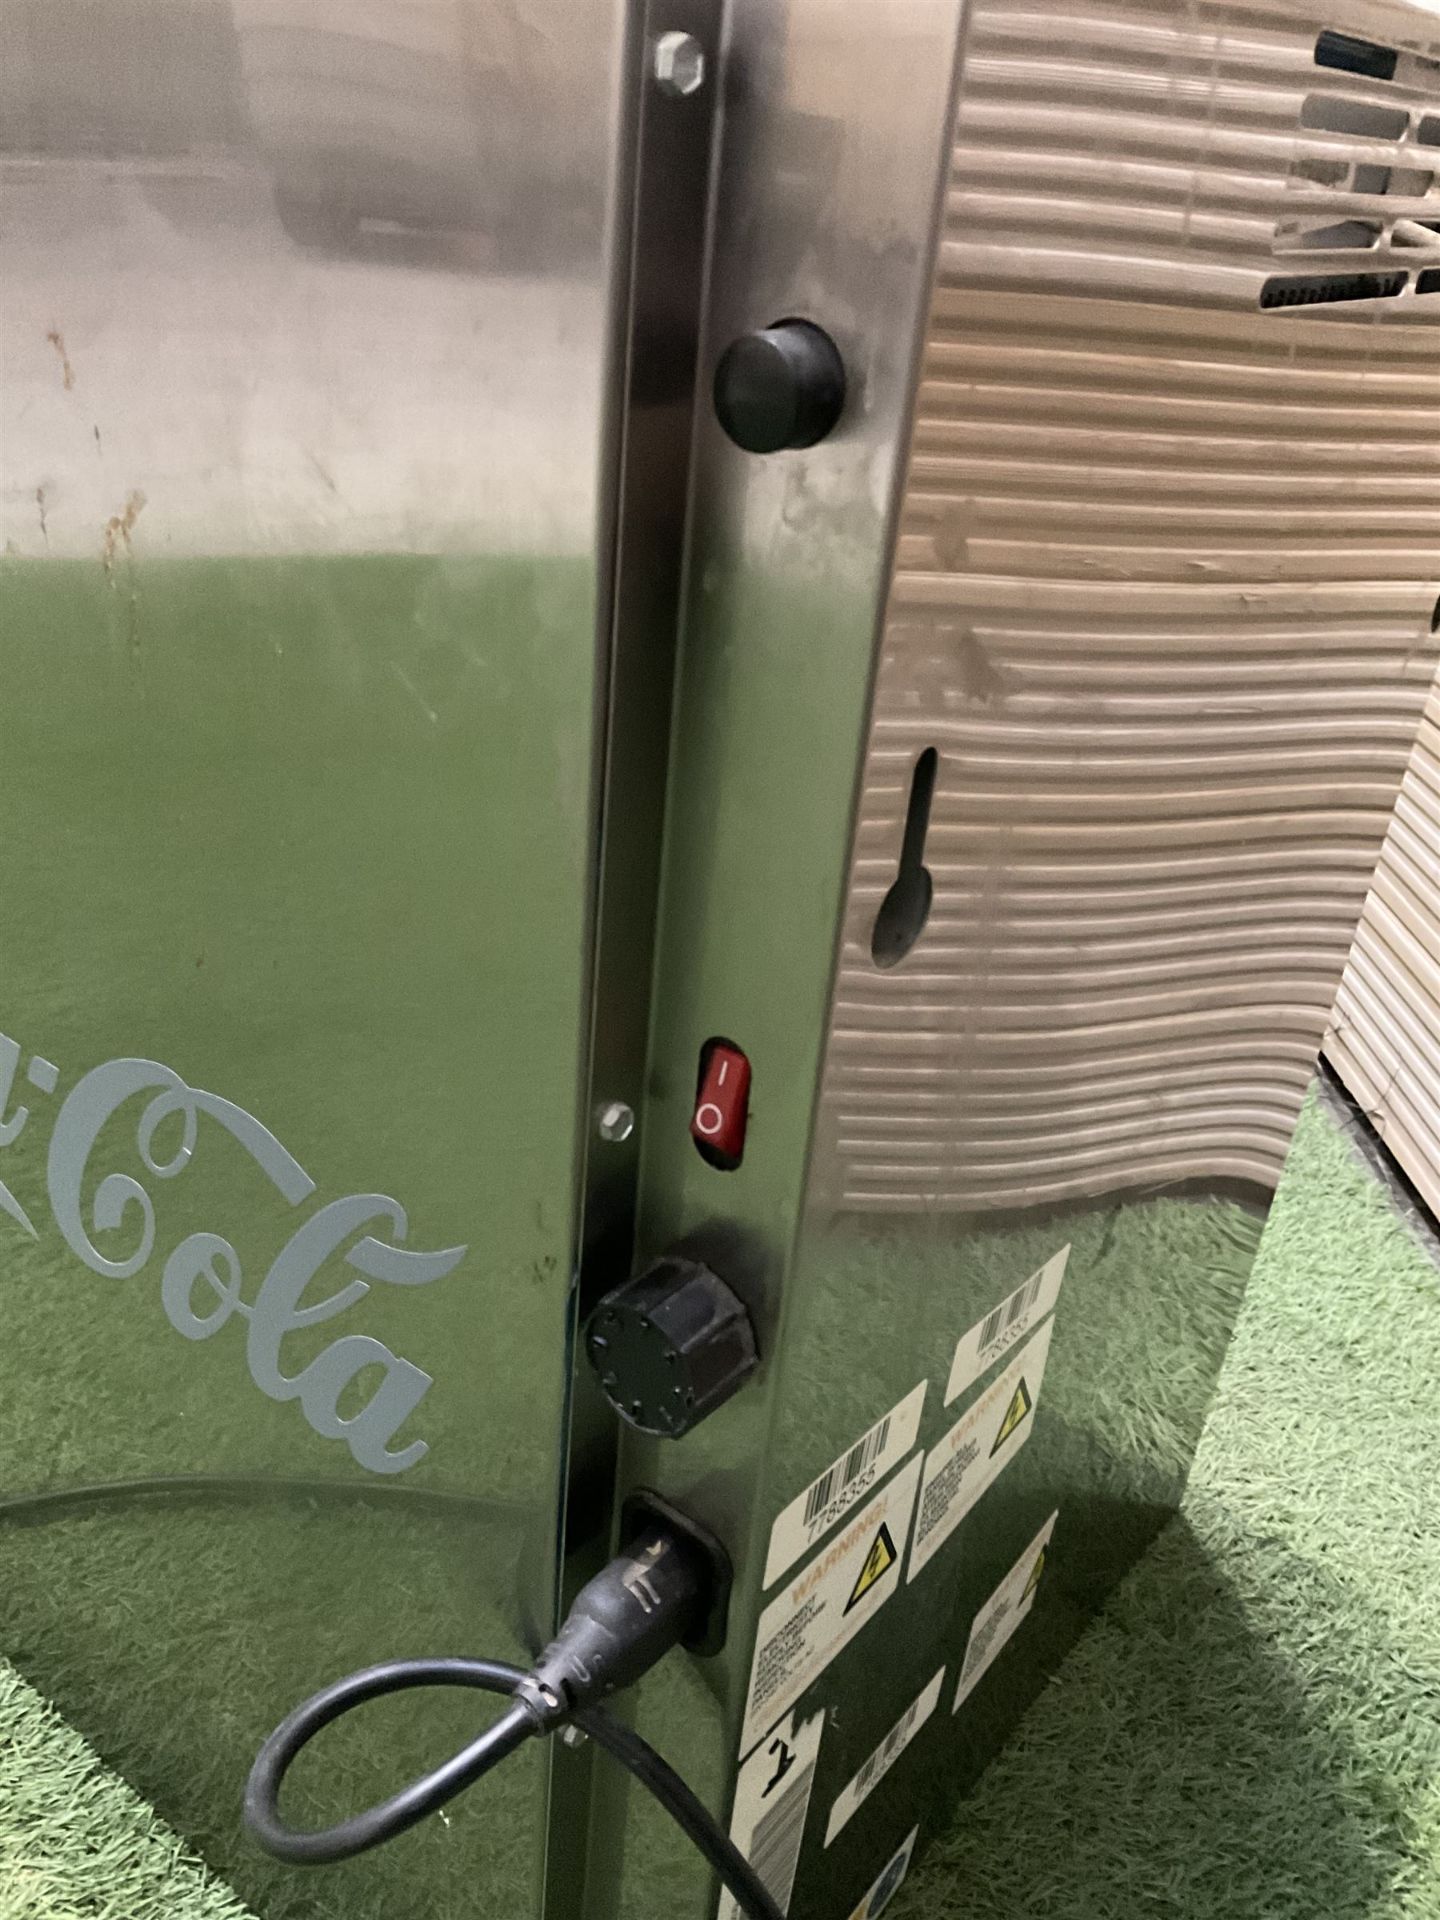 CocaCola stainless steel see trough mini fridge - THIS LOT IS TO BE COLLECTED BY APPOINTMENT FROM D - Image 4 of 8